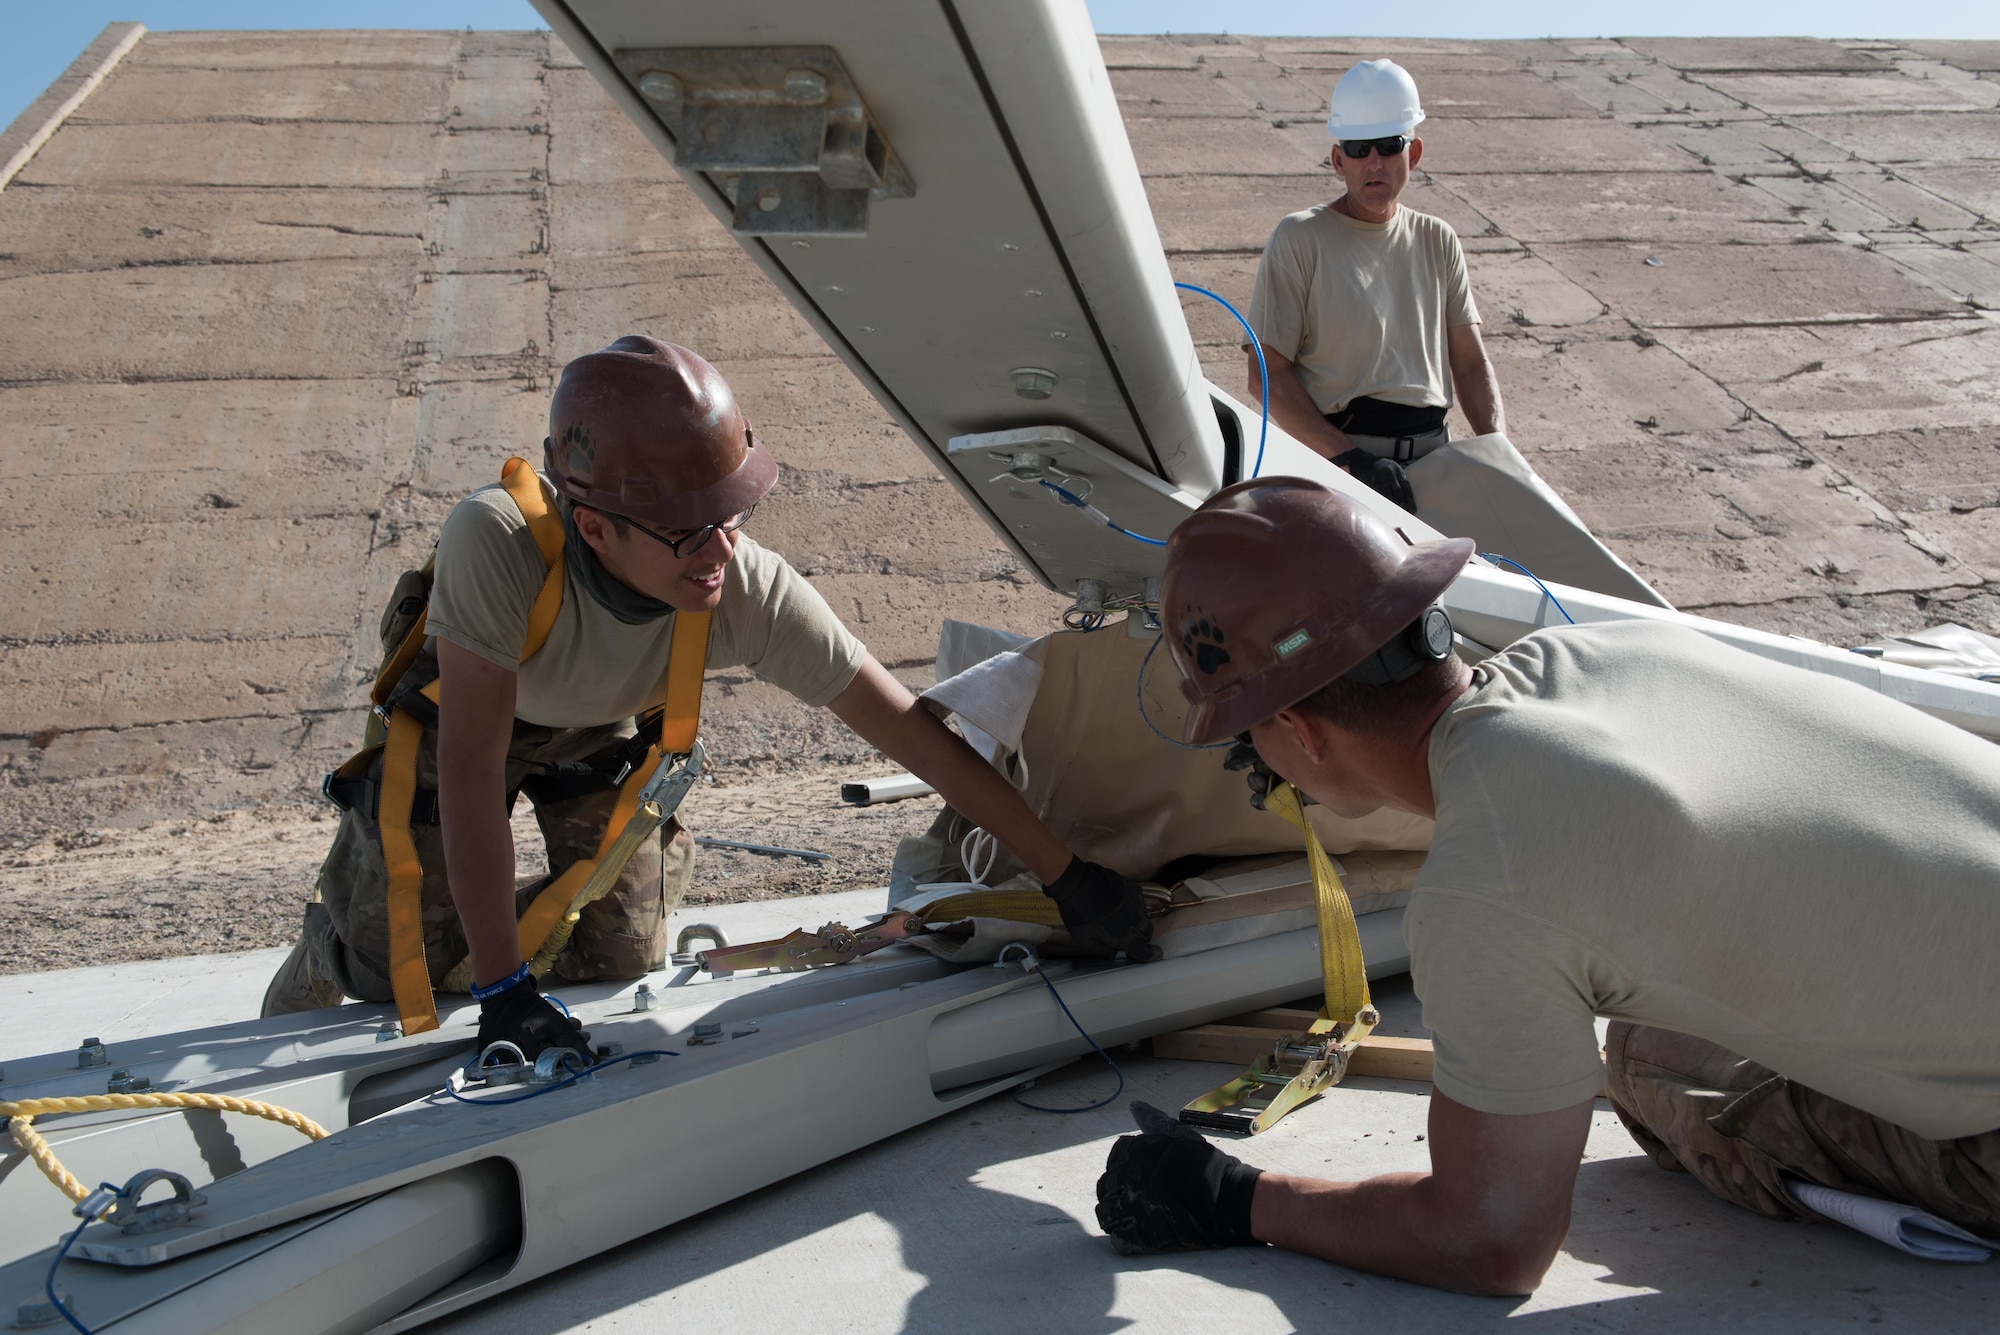 Airmen assigned to the 407th Expeditionary Civil Engineer Squadron and 577th Expeditionary Prime Beef Squadron install canvas on a new 4k dome at the 407th Air Expeditionary Group, March 21, 2017. The new structure will provide 4,000 square feet of covered area to maintain vehicles operating in support of Operation Inherent Resolve. (U.S. Air Force photo/Master Sgt. Benjamin Wilson)(Released)